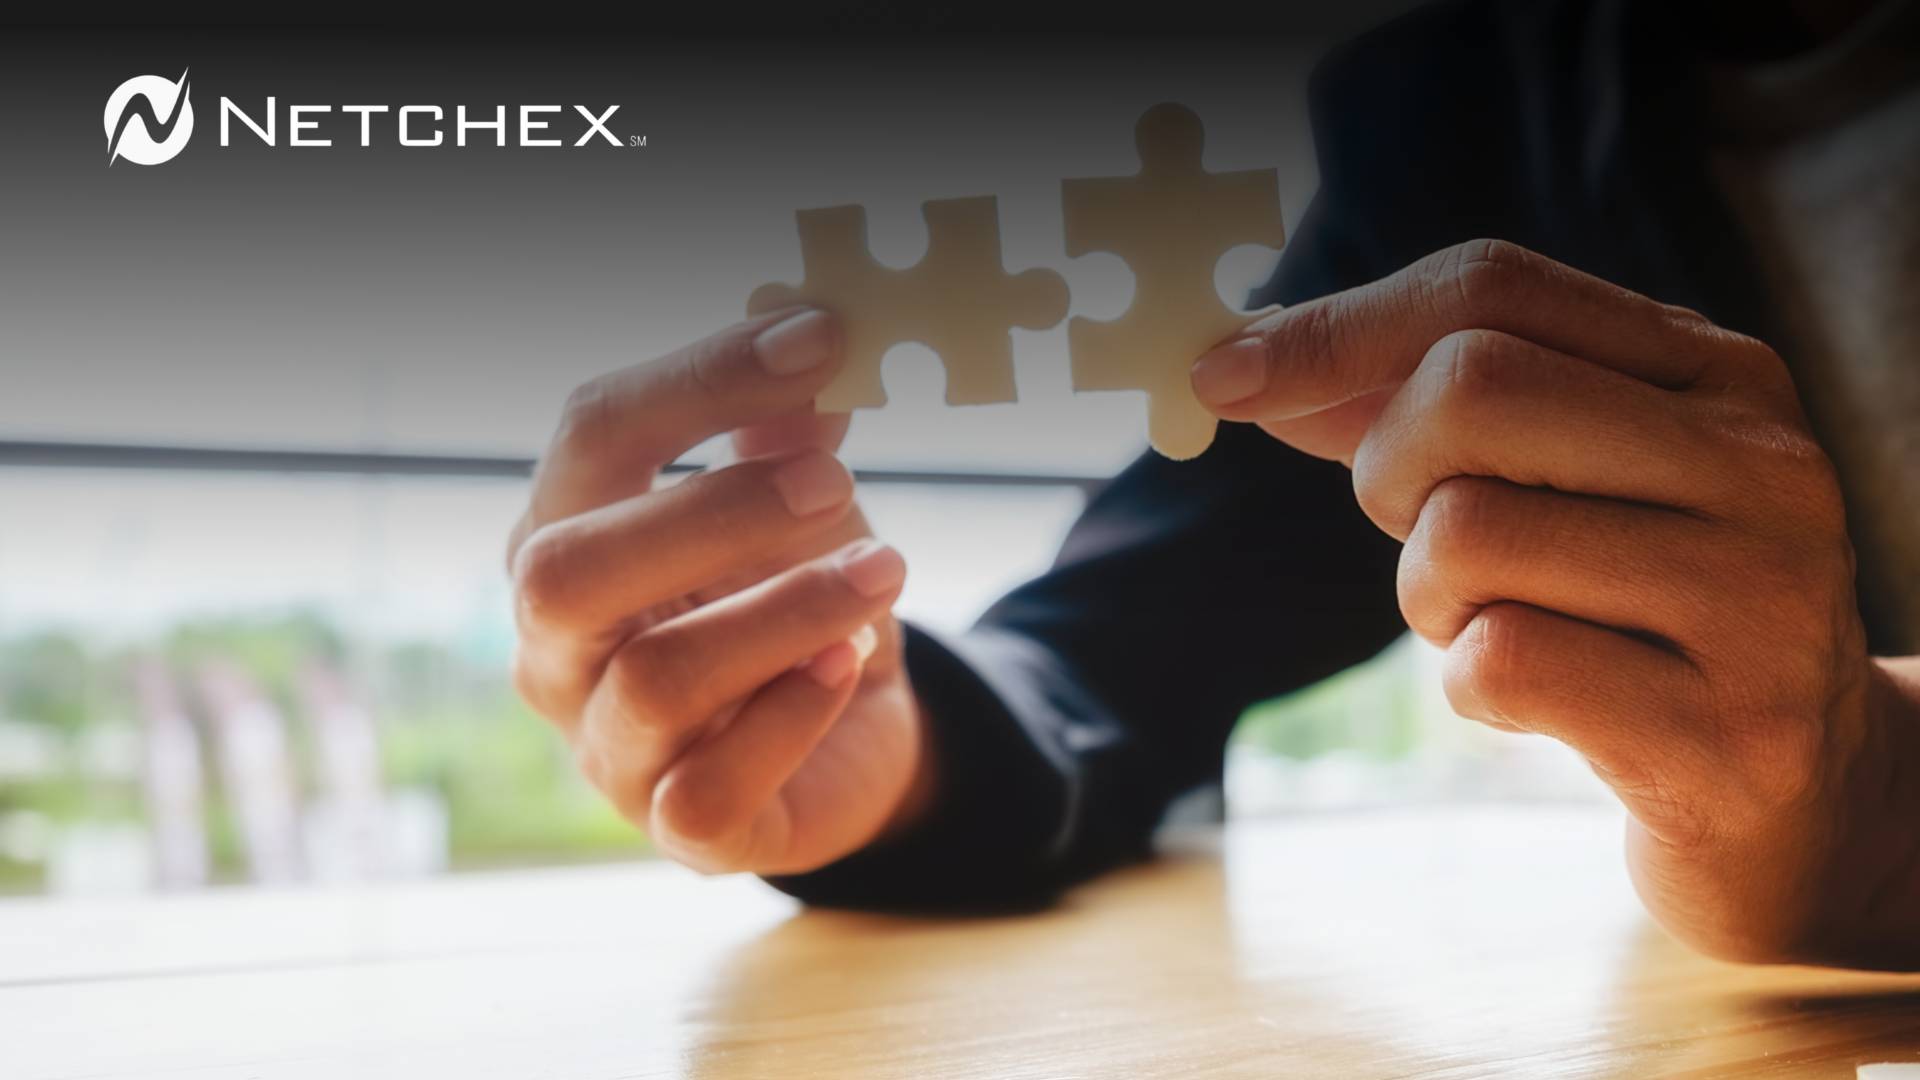 Netchex Launches Netchex 401k in Partnership with Vestwell to Simplify Retirement Savings for SMEs